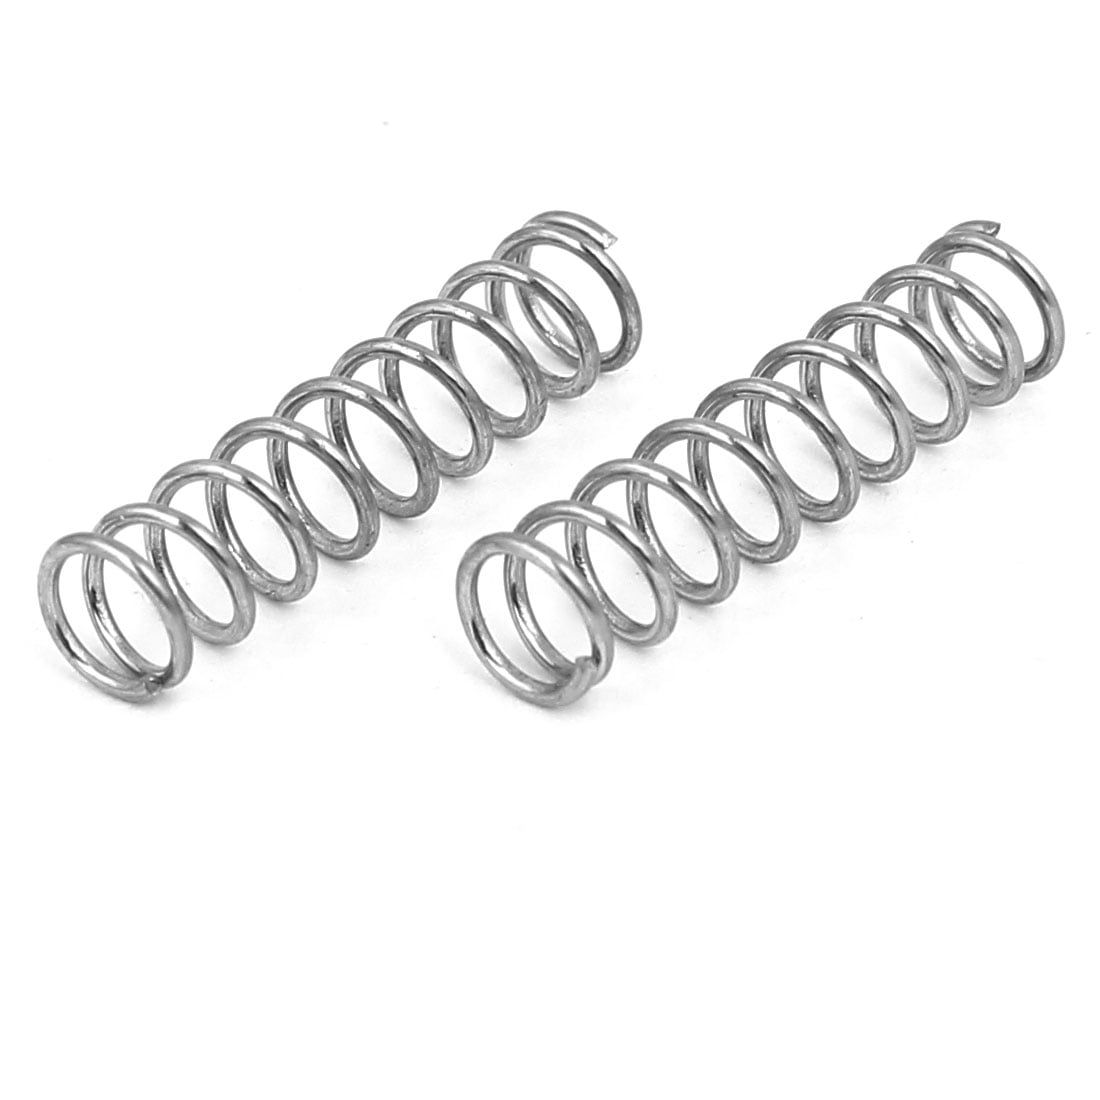 OD 10 Pcs Small Compression Springs 15 mm Long x 3.7 mm 5/8 in. 5/32 in. 